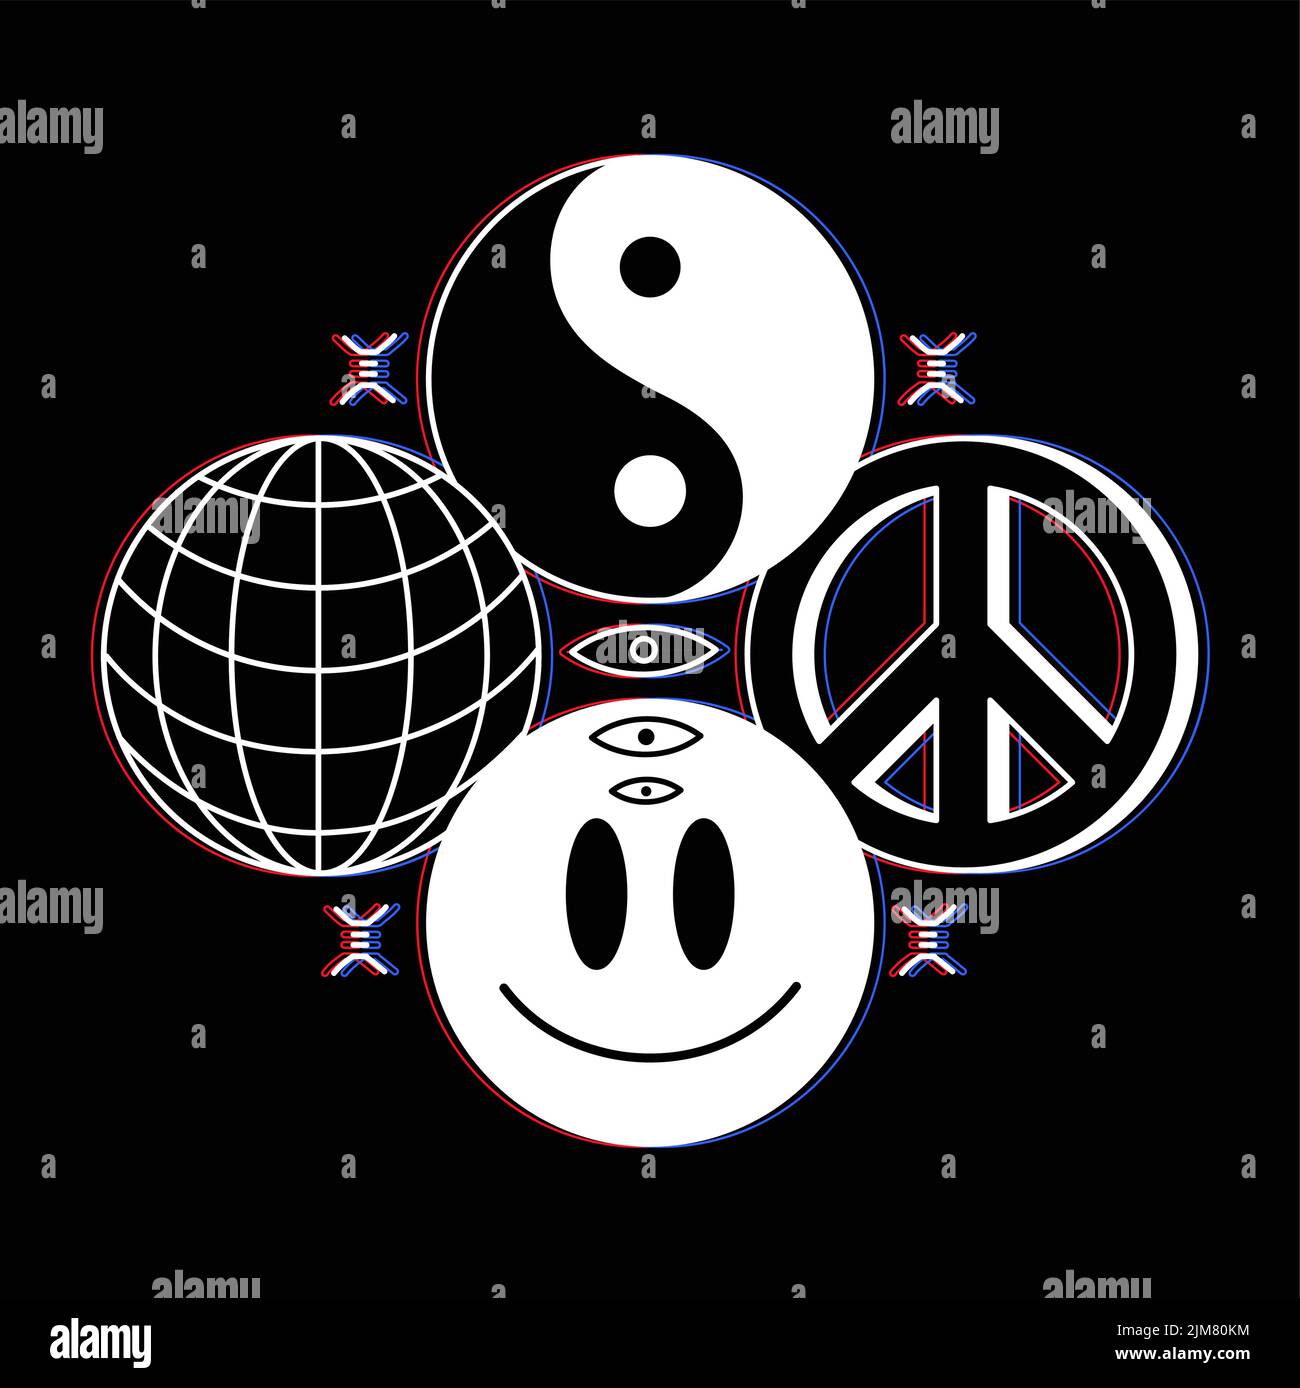 Yin Yang,sphere,smile face,peace signs.Vector line graphic illustration logo design.Yin yang,earth sphere,smile face,hippie peace symbol,techno,glitch print for t-shirt,tee,poster concept Stock Vector